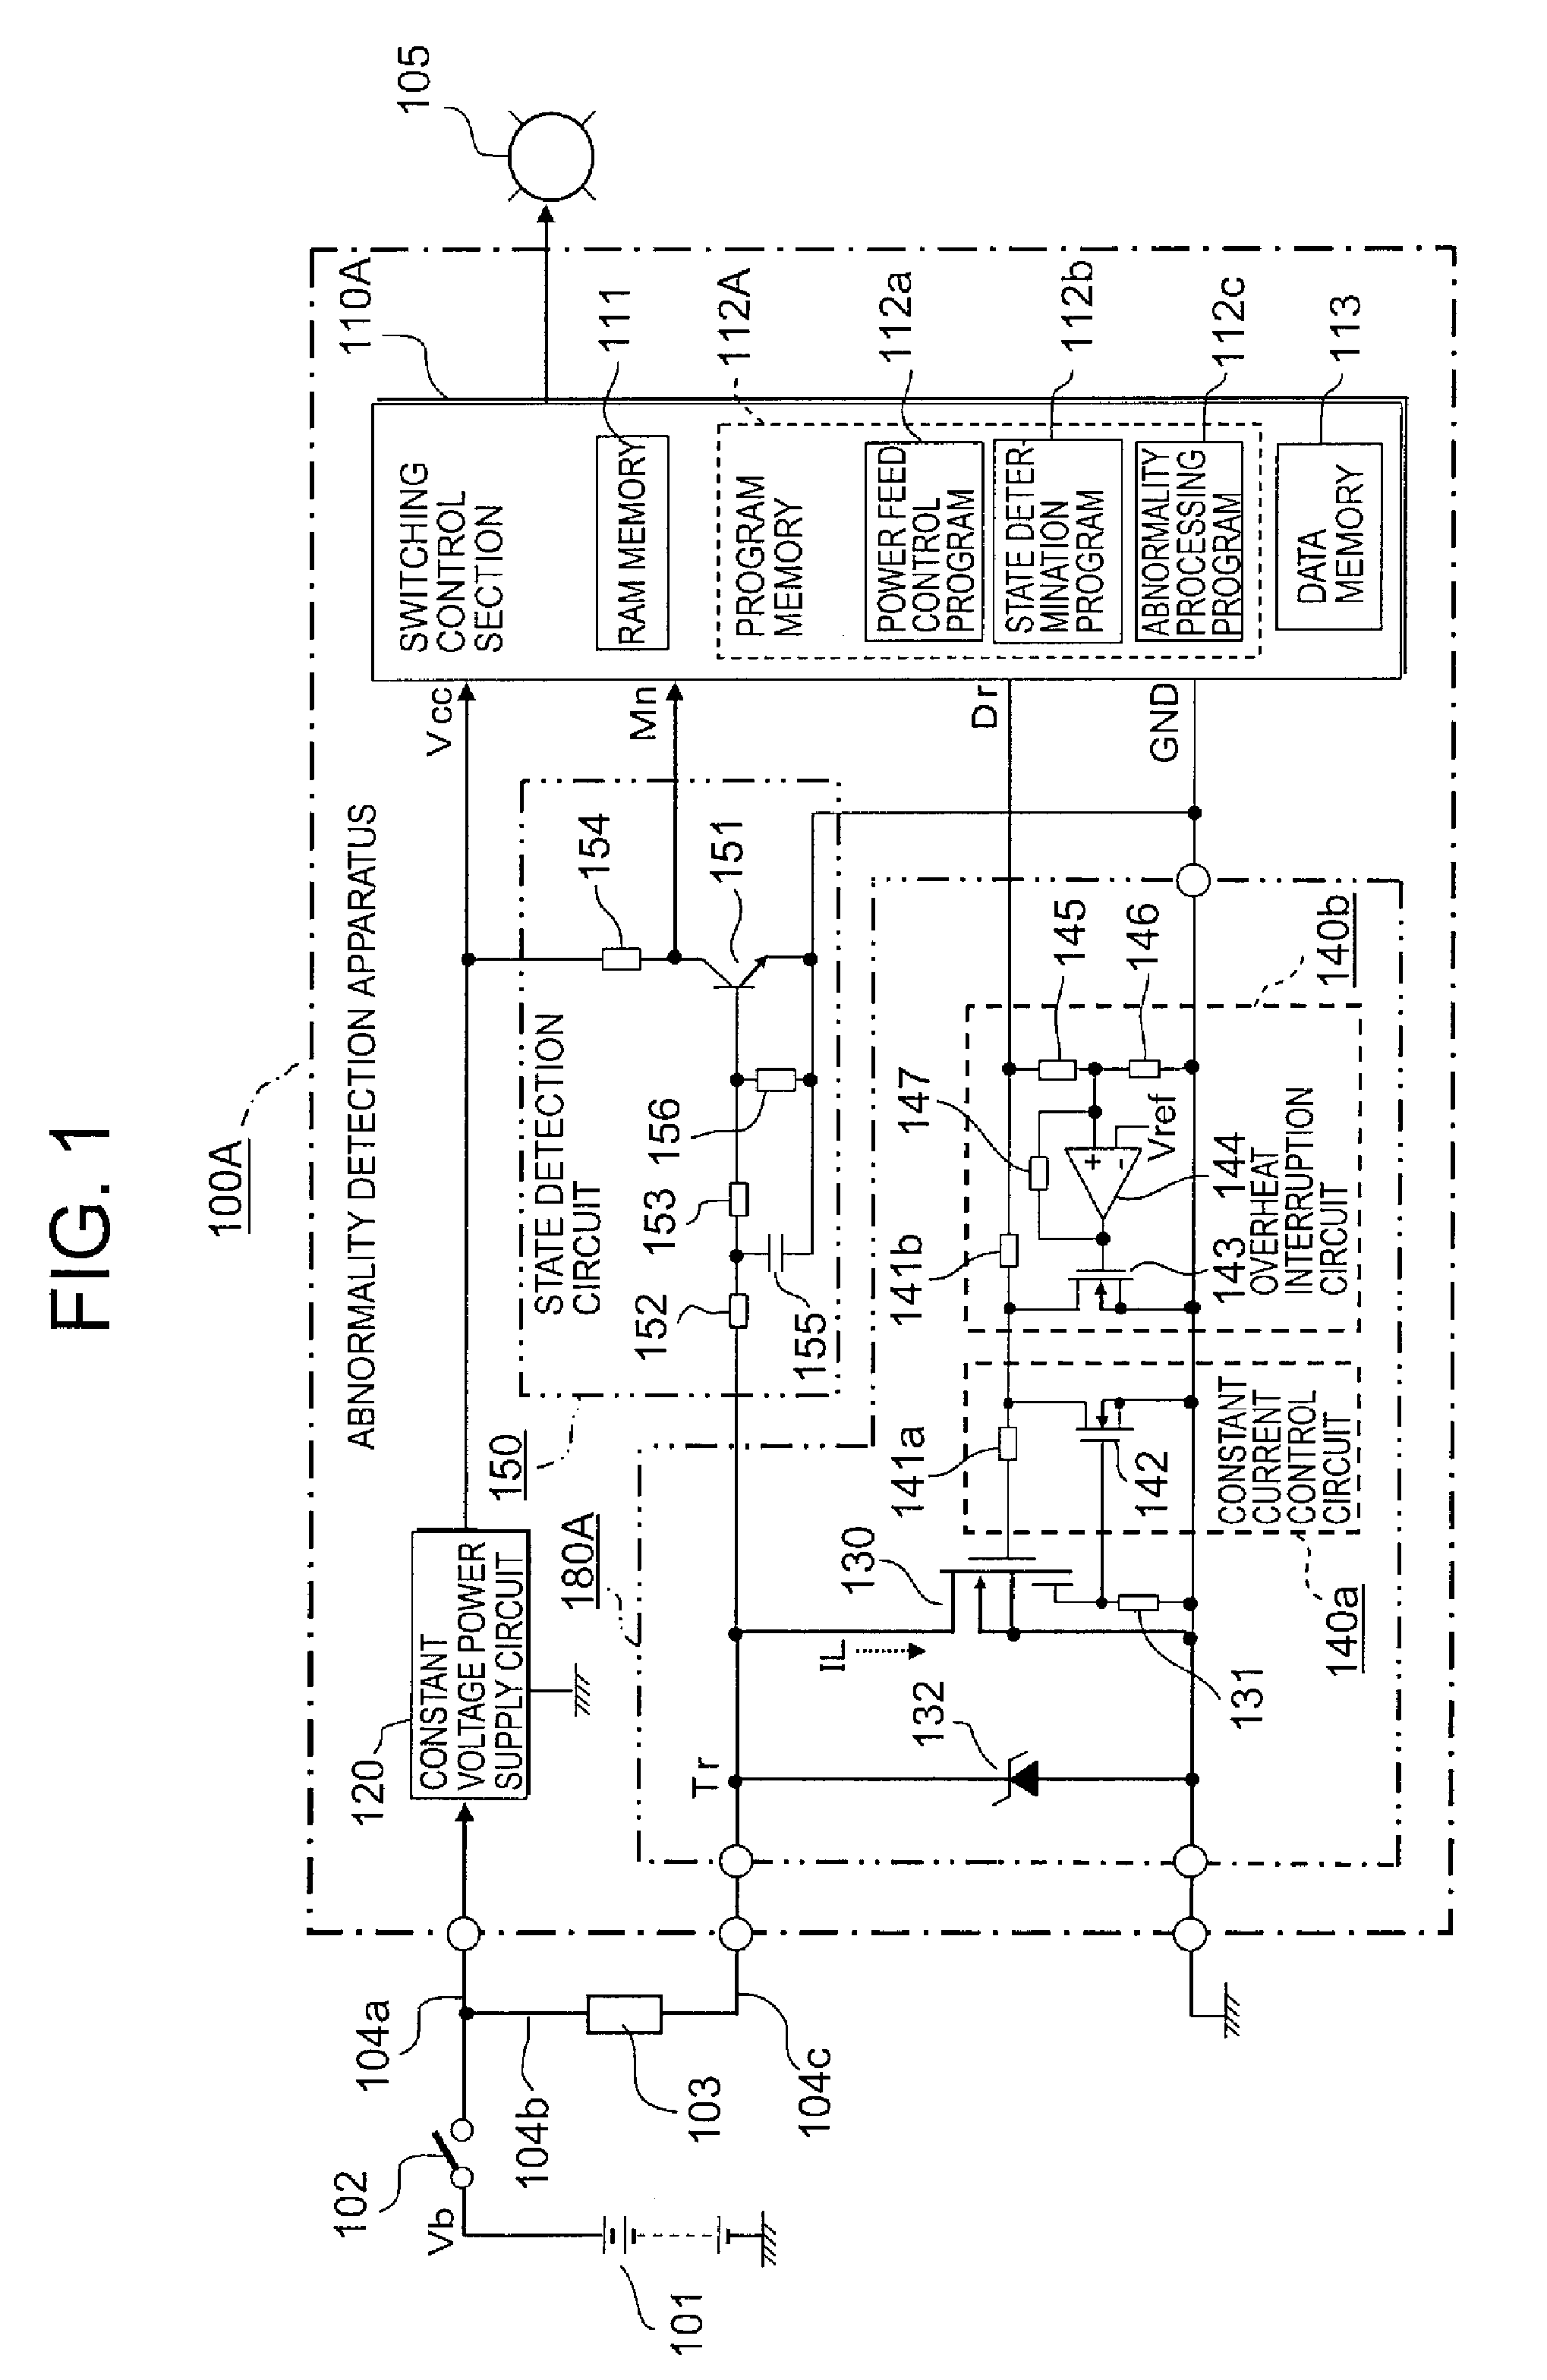 Abnormality detection apparatus for a power feed circuit